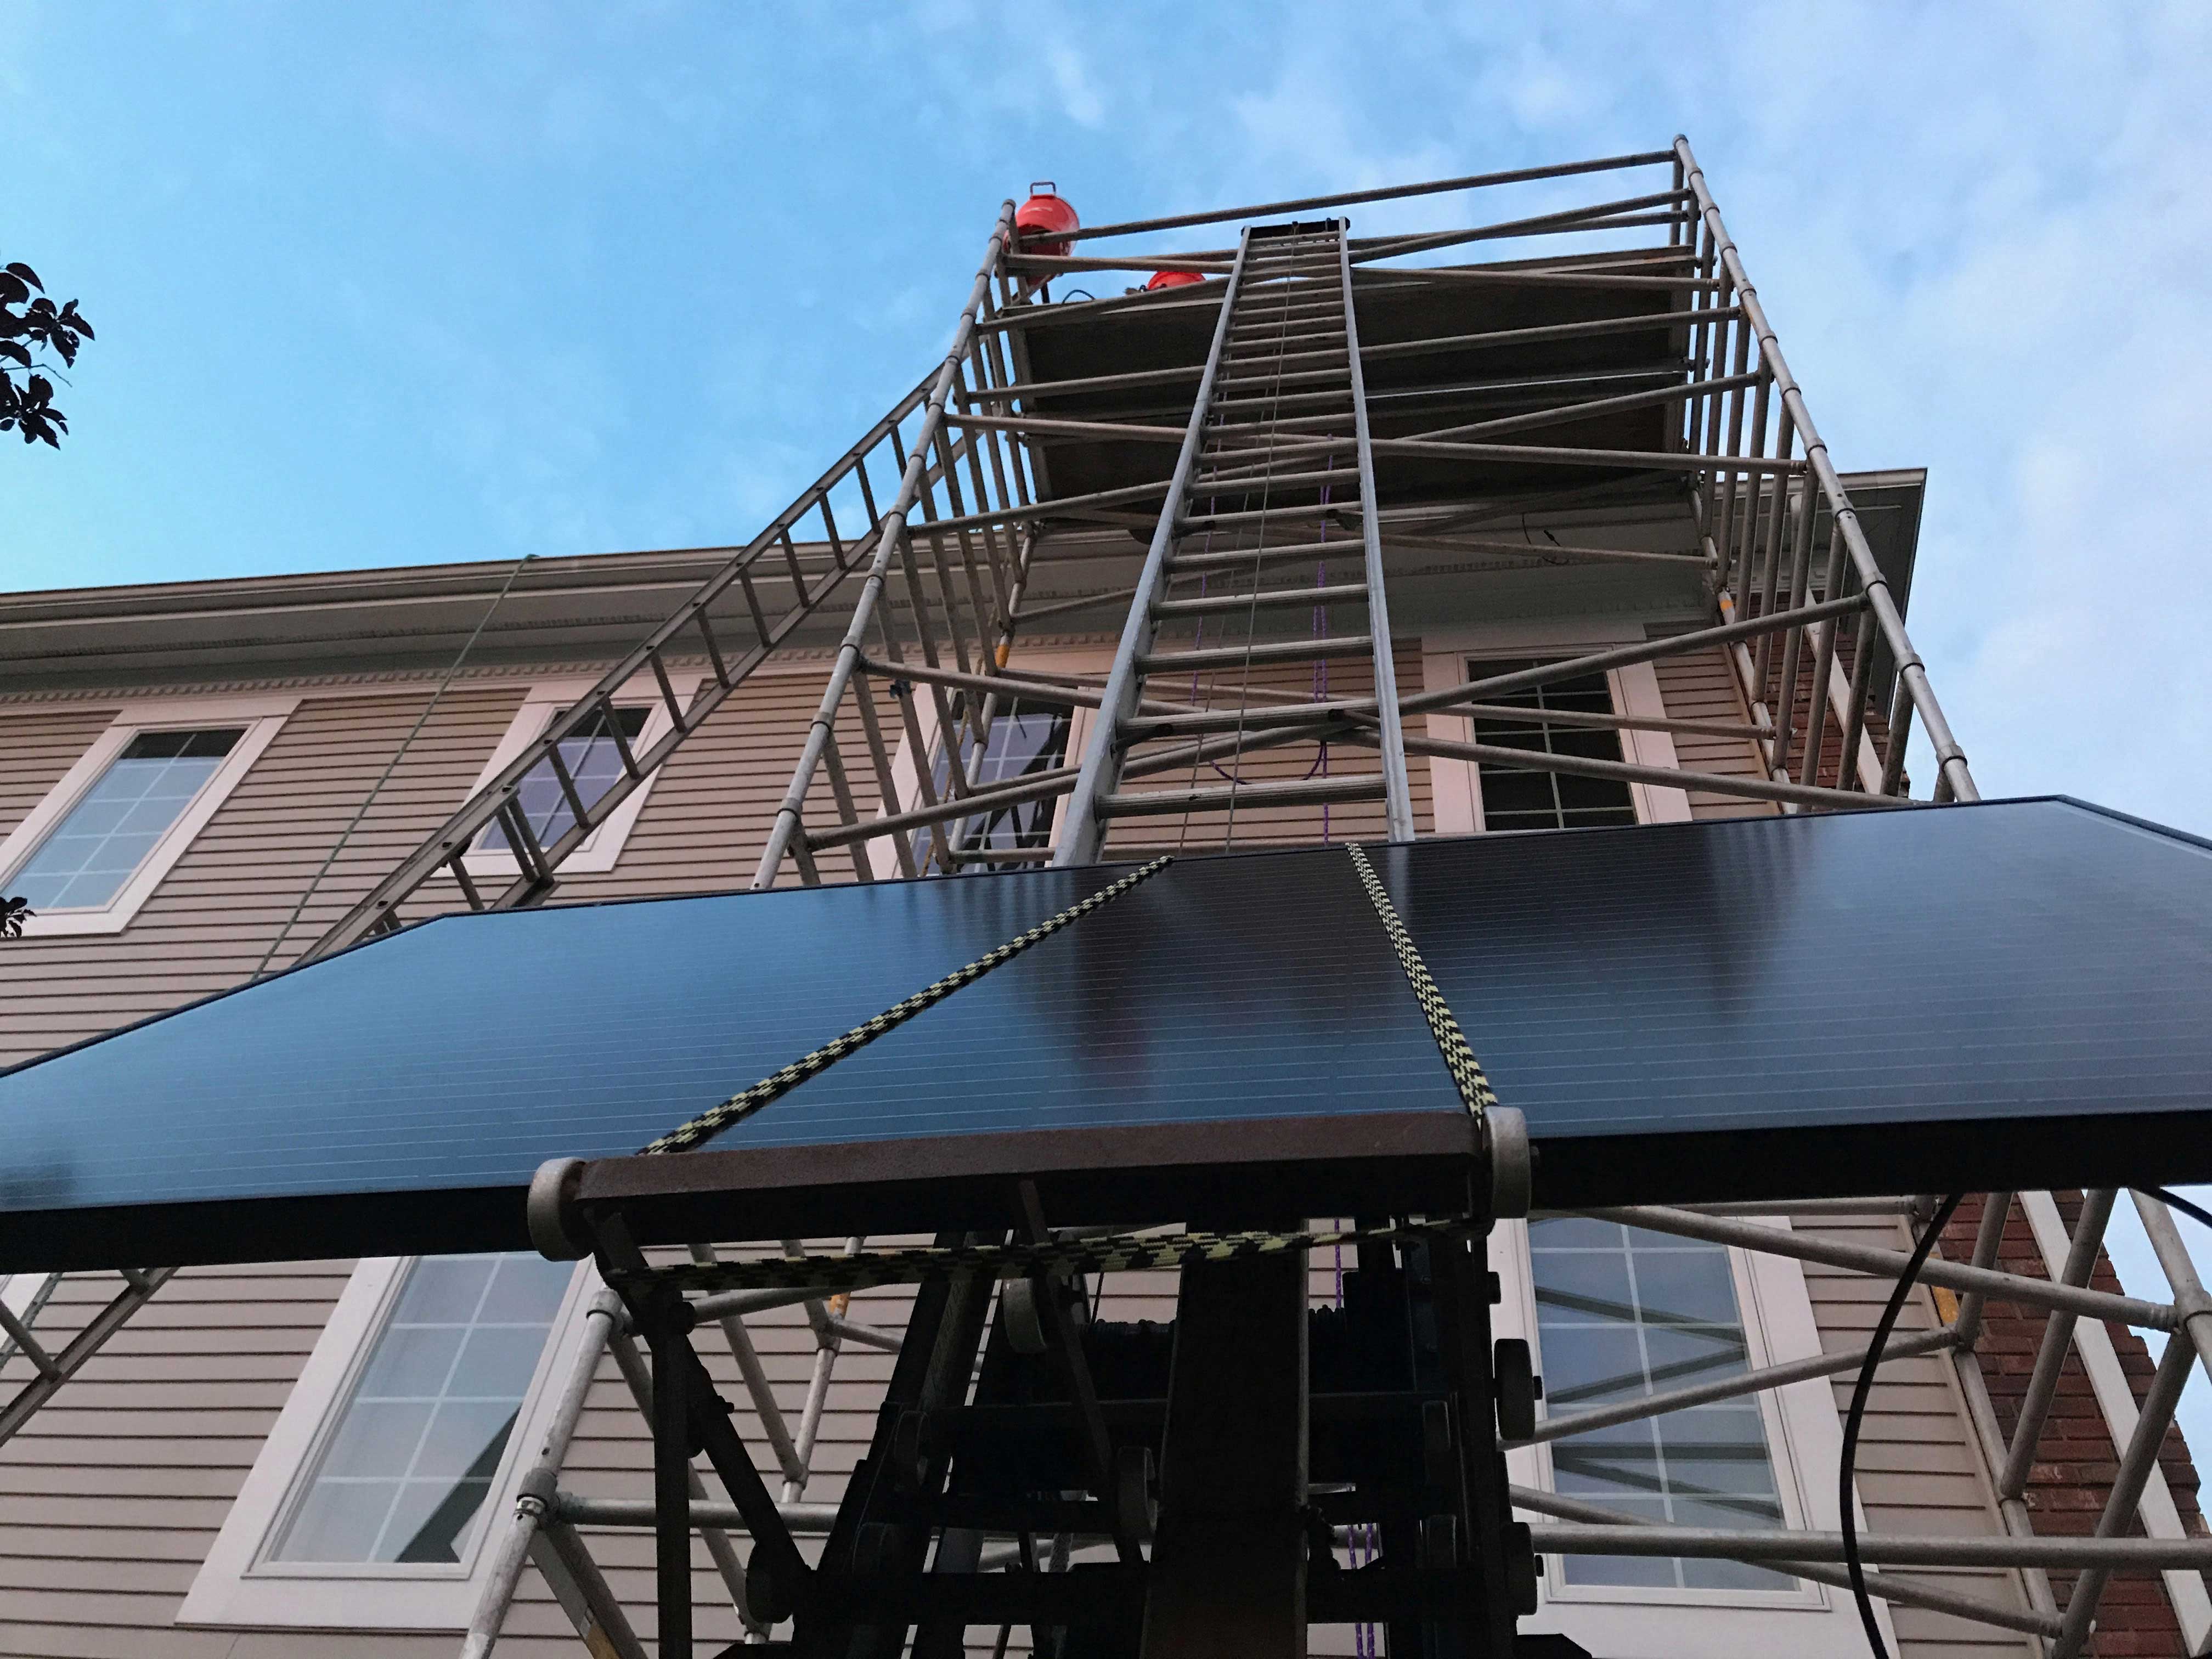 Solar stairway to heaven, courtesy of our ladderator!